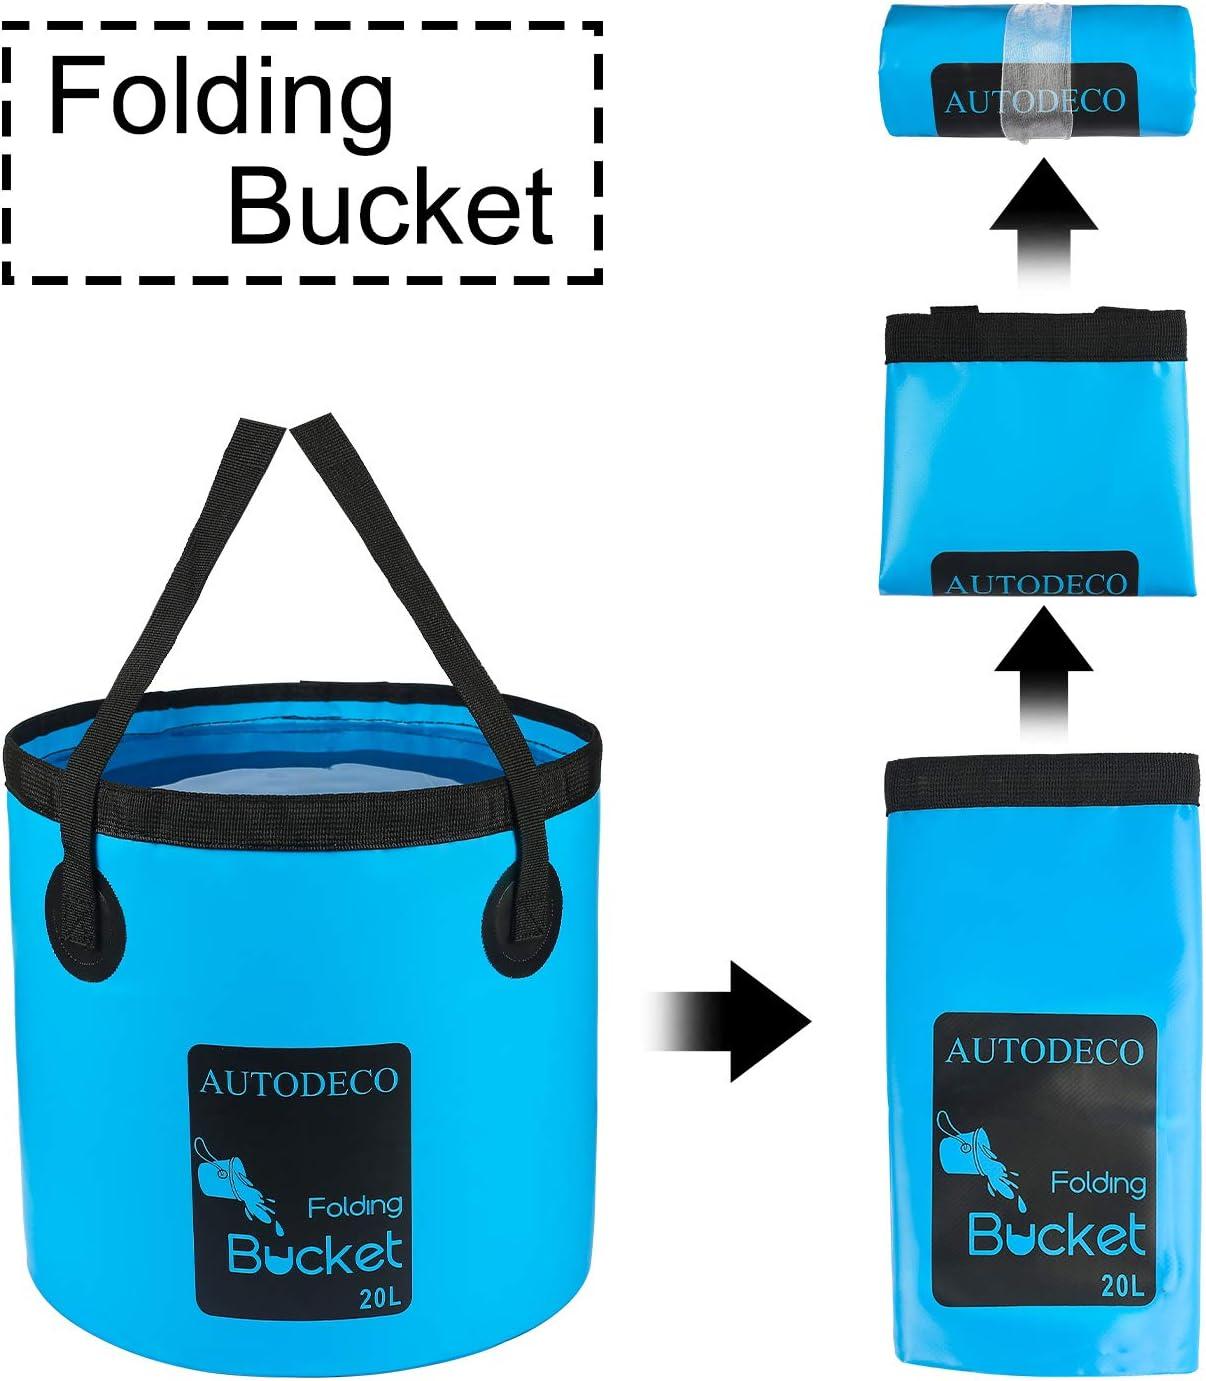 AUTODECO Collapsible Bucket 5 Gallon Container Folding Water Bucket  Portable Wash Basin for Camping Fishing Travelling Outdoor Gardening Car  Washing Blue 1Pcs 20L